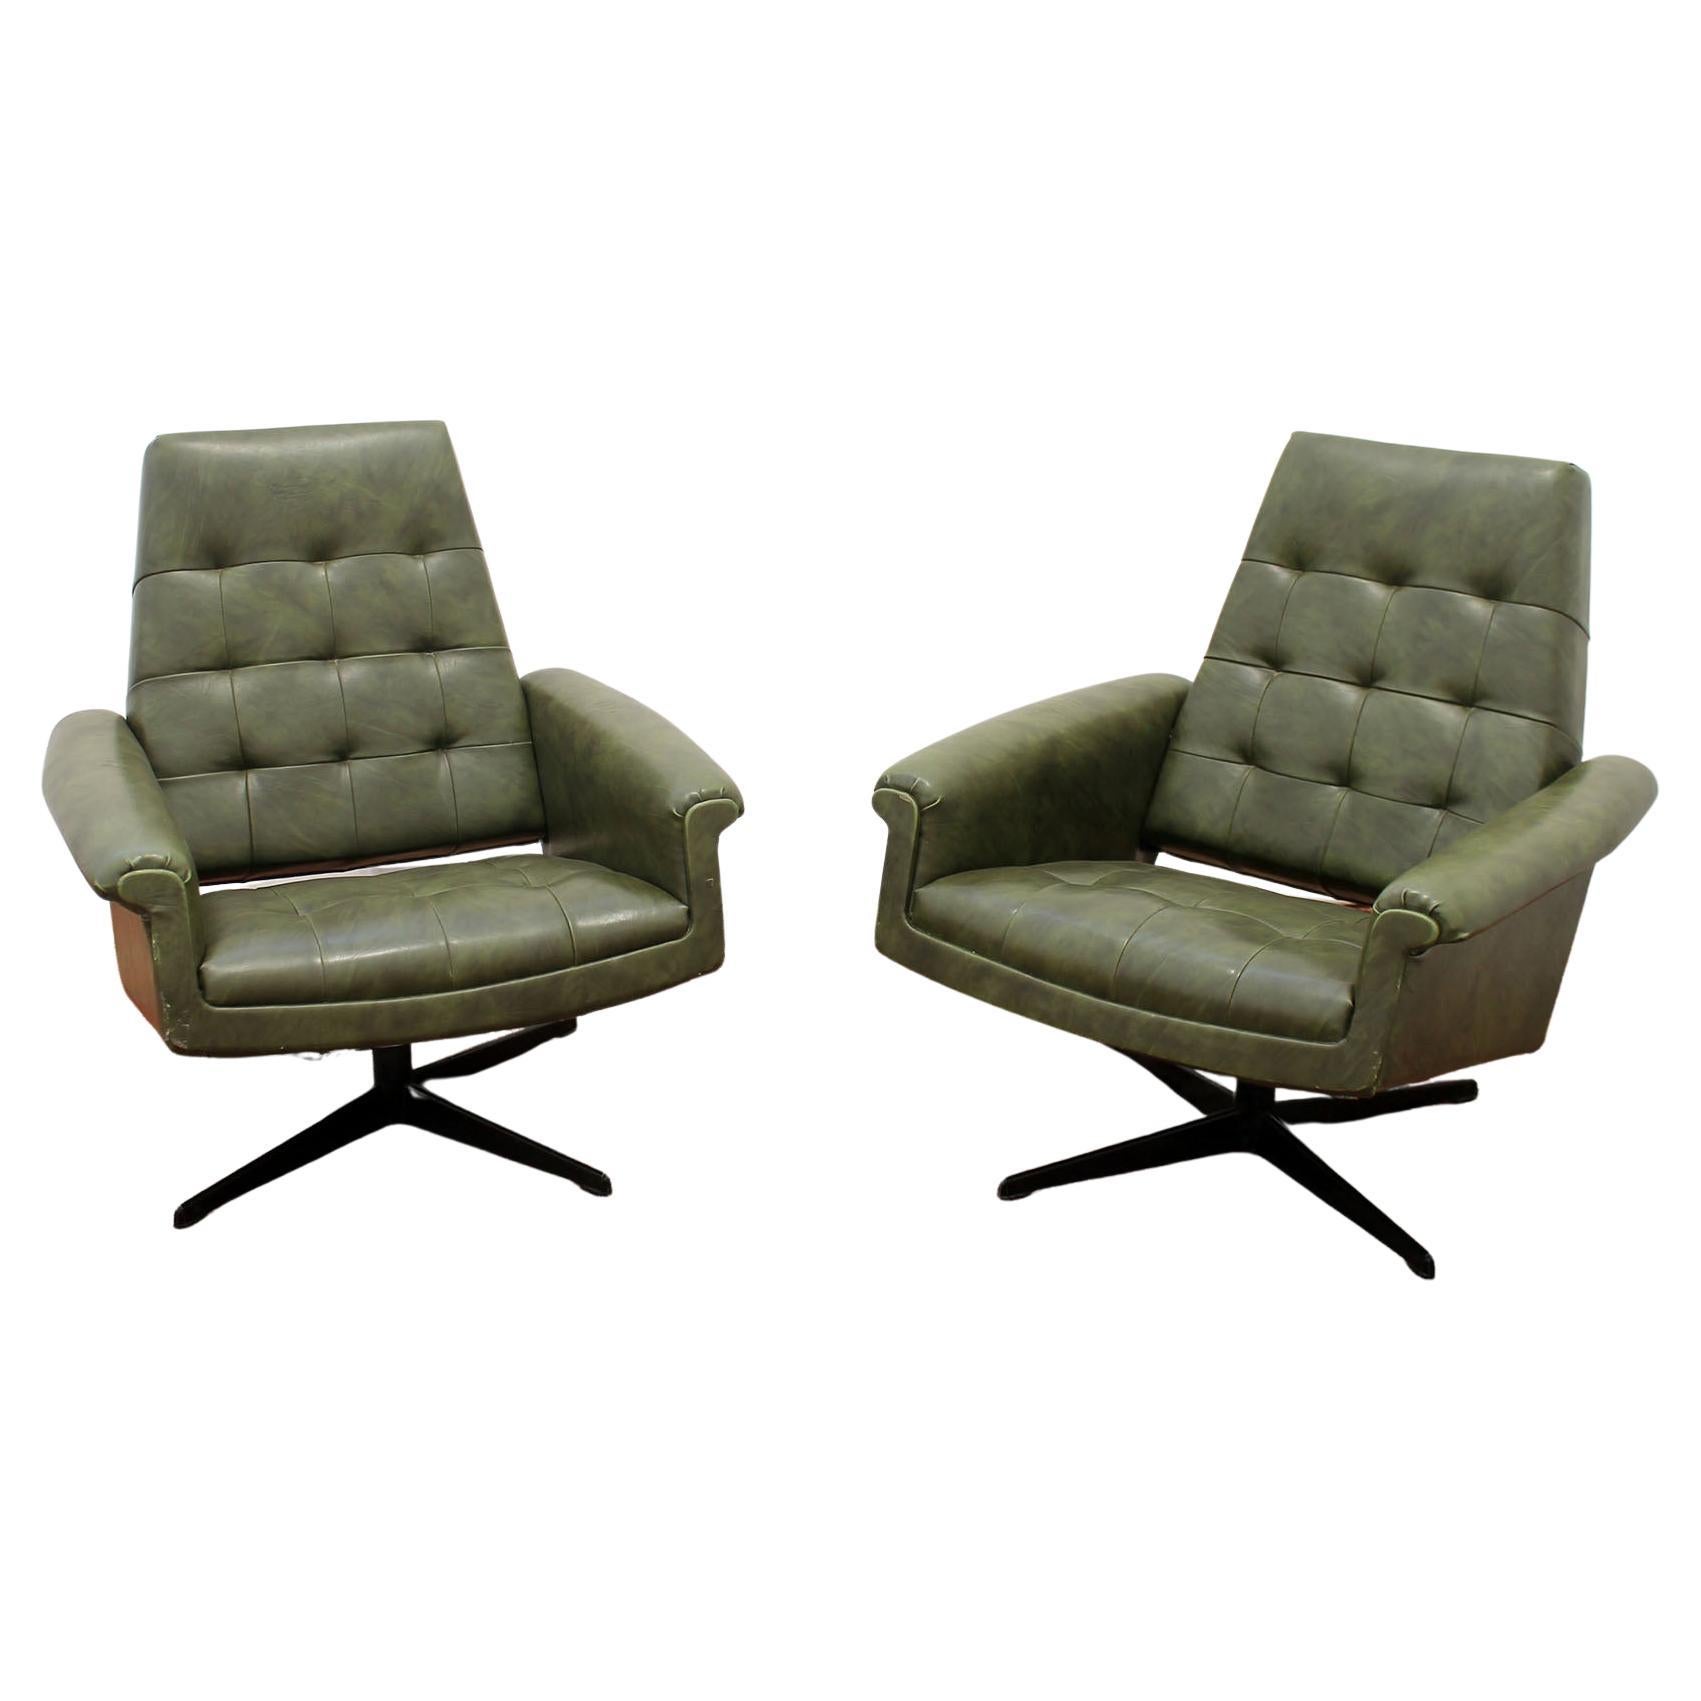 Pair of Leather Swivel Armchairs from Up Zavody, 1970s For Sale